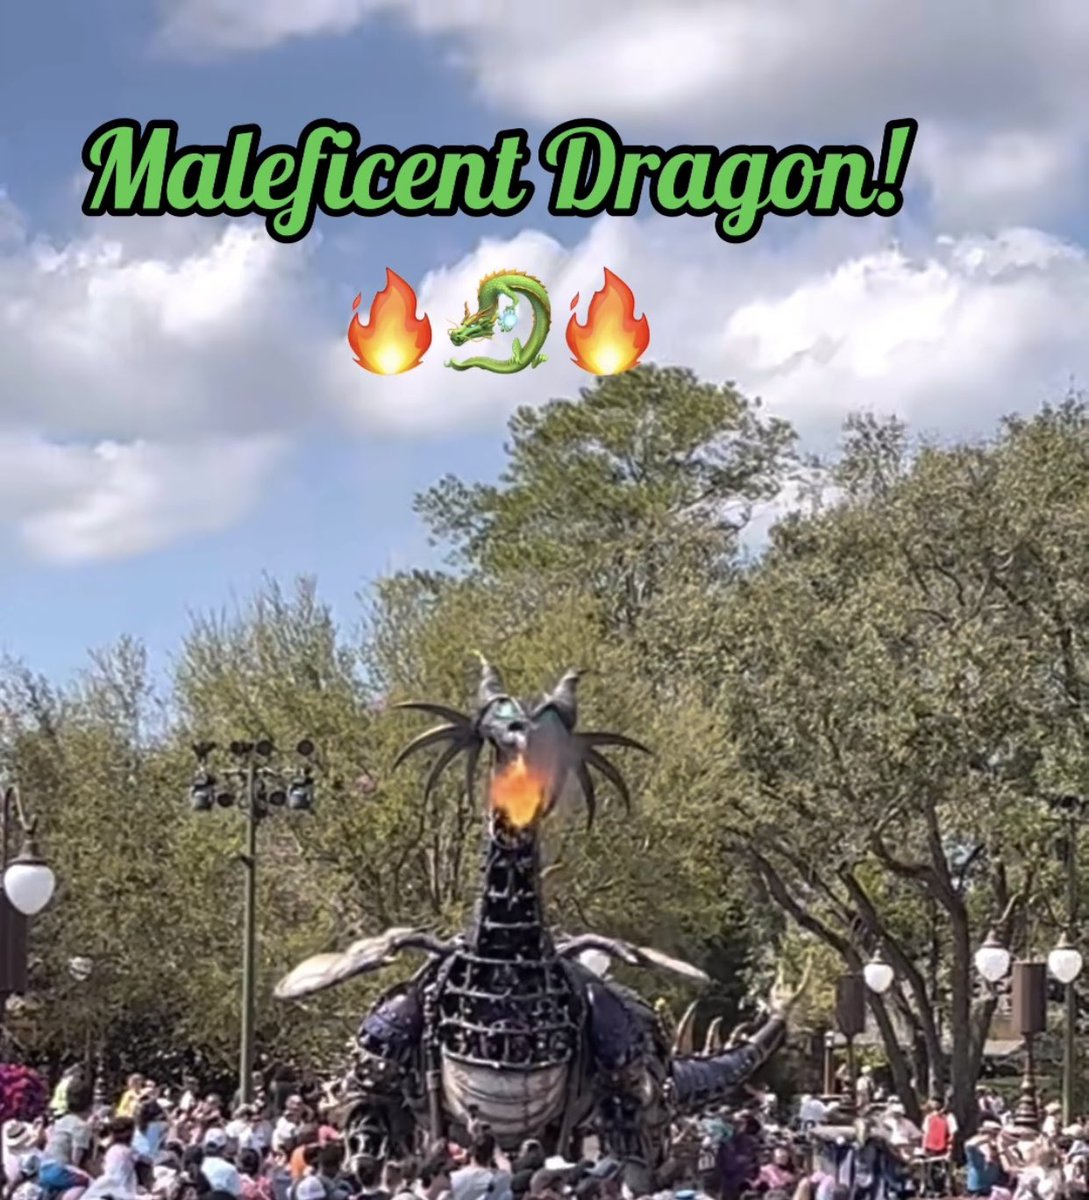 Check out my New Short! Maleficent!  Fire Breathing Dragon🔥🐉🔥in the Festival of Fantasy Parade at Magic Kingdom 🏰 in Walt Disney World! youtube.com/shorts/gGt13PO…
 #shorts #maleficent #DisneyWorld #magickingdom #festivaloffantasy #parade
#traveladvisor #awesomesunsetstravel